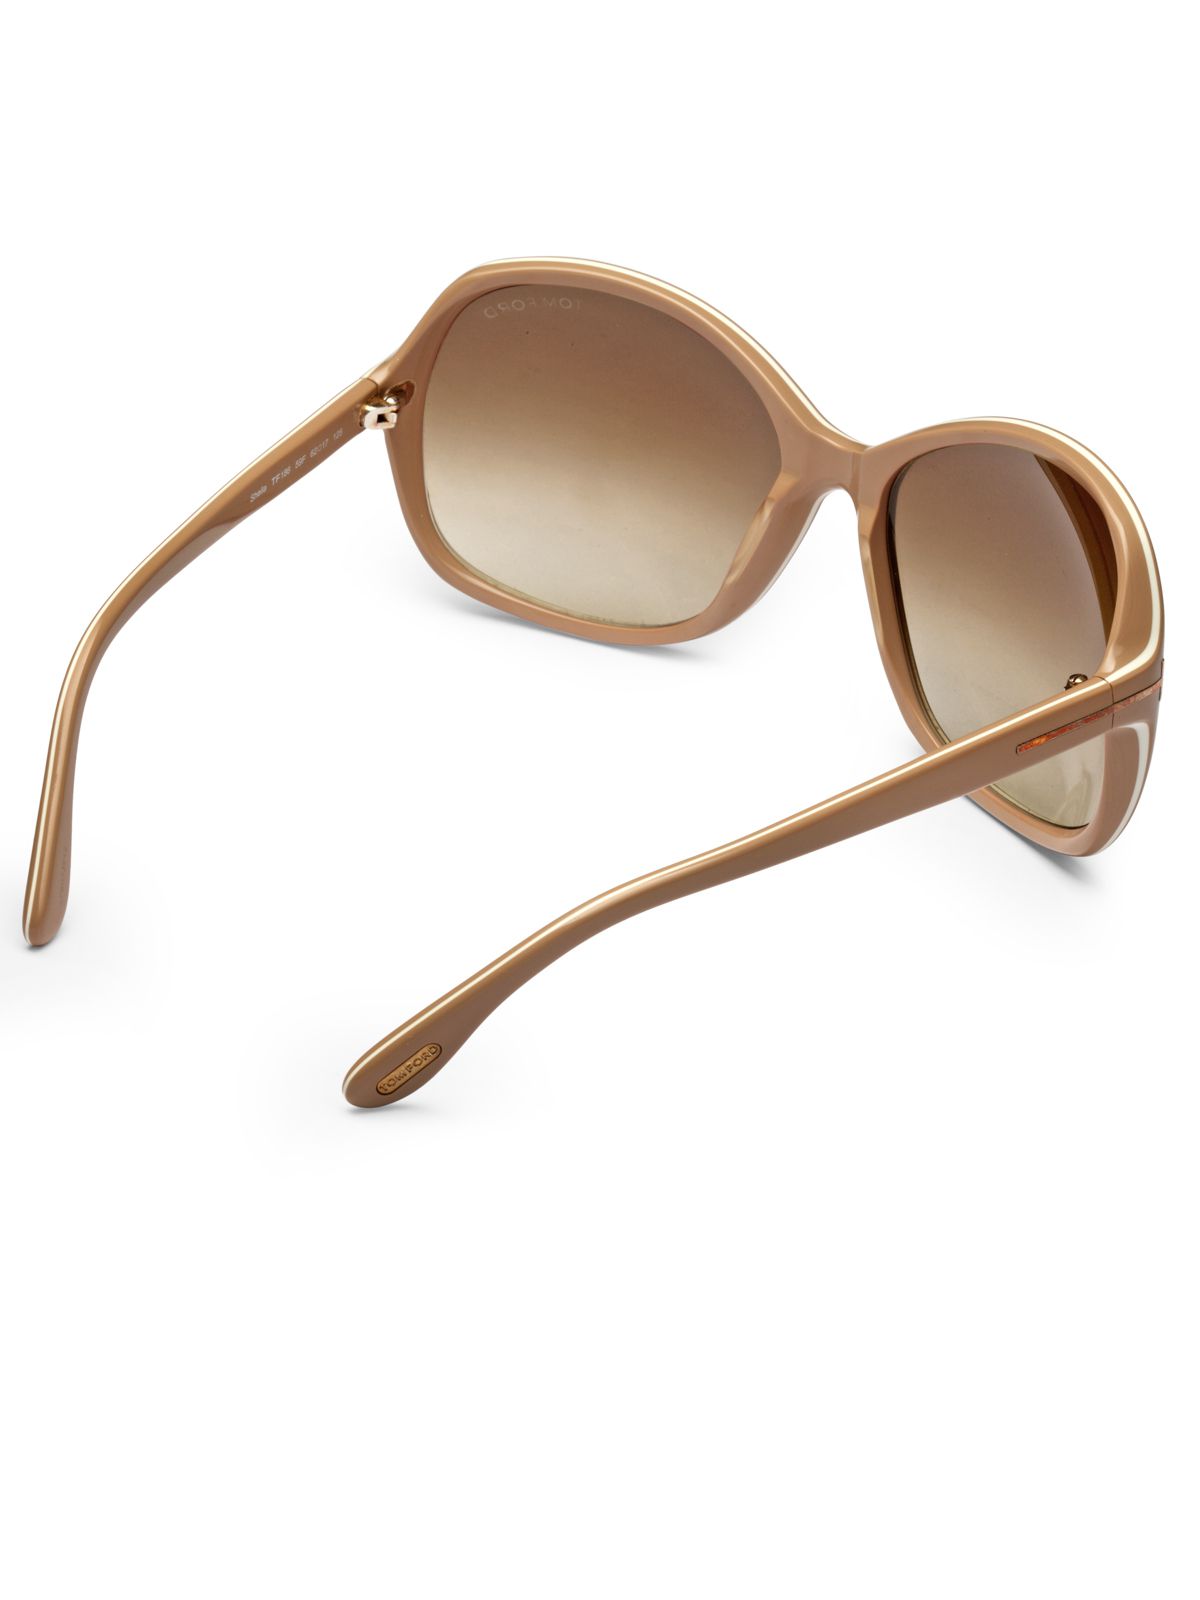 Tom Ford Brown Oversized Sunglasses ( SHEILA 186 59F|62 ) - Buy Tom Ford  Brown Oversized Sunglasses ( SHEILA 186 59F|62 ) Online at Low Price -  Snapdeal